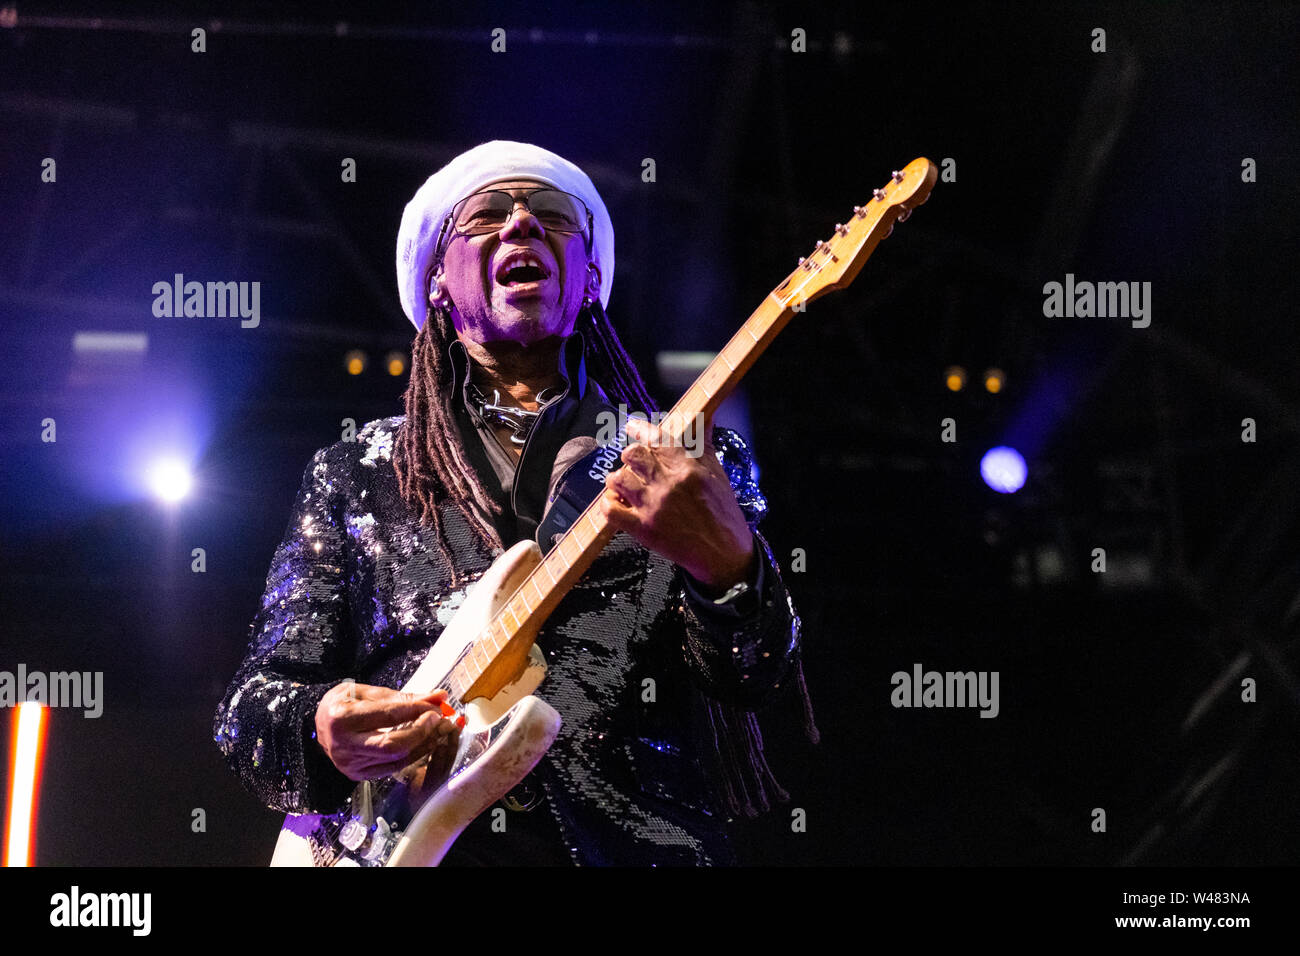 Liverpool, UK. July 20, 2019. Three-time Grammy Award winner, Nile Rodgers & Chic, performing in front of a sell-out crowd at the Liverpool International Music Festival (LIMF) in Sefton Park in Liverpool, north west England on Saturday, July 20, 2019. Credit: Christopher Middleton/Alamy Live News Stock Photo